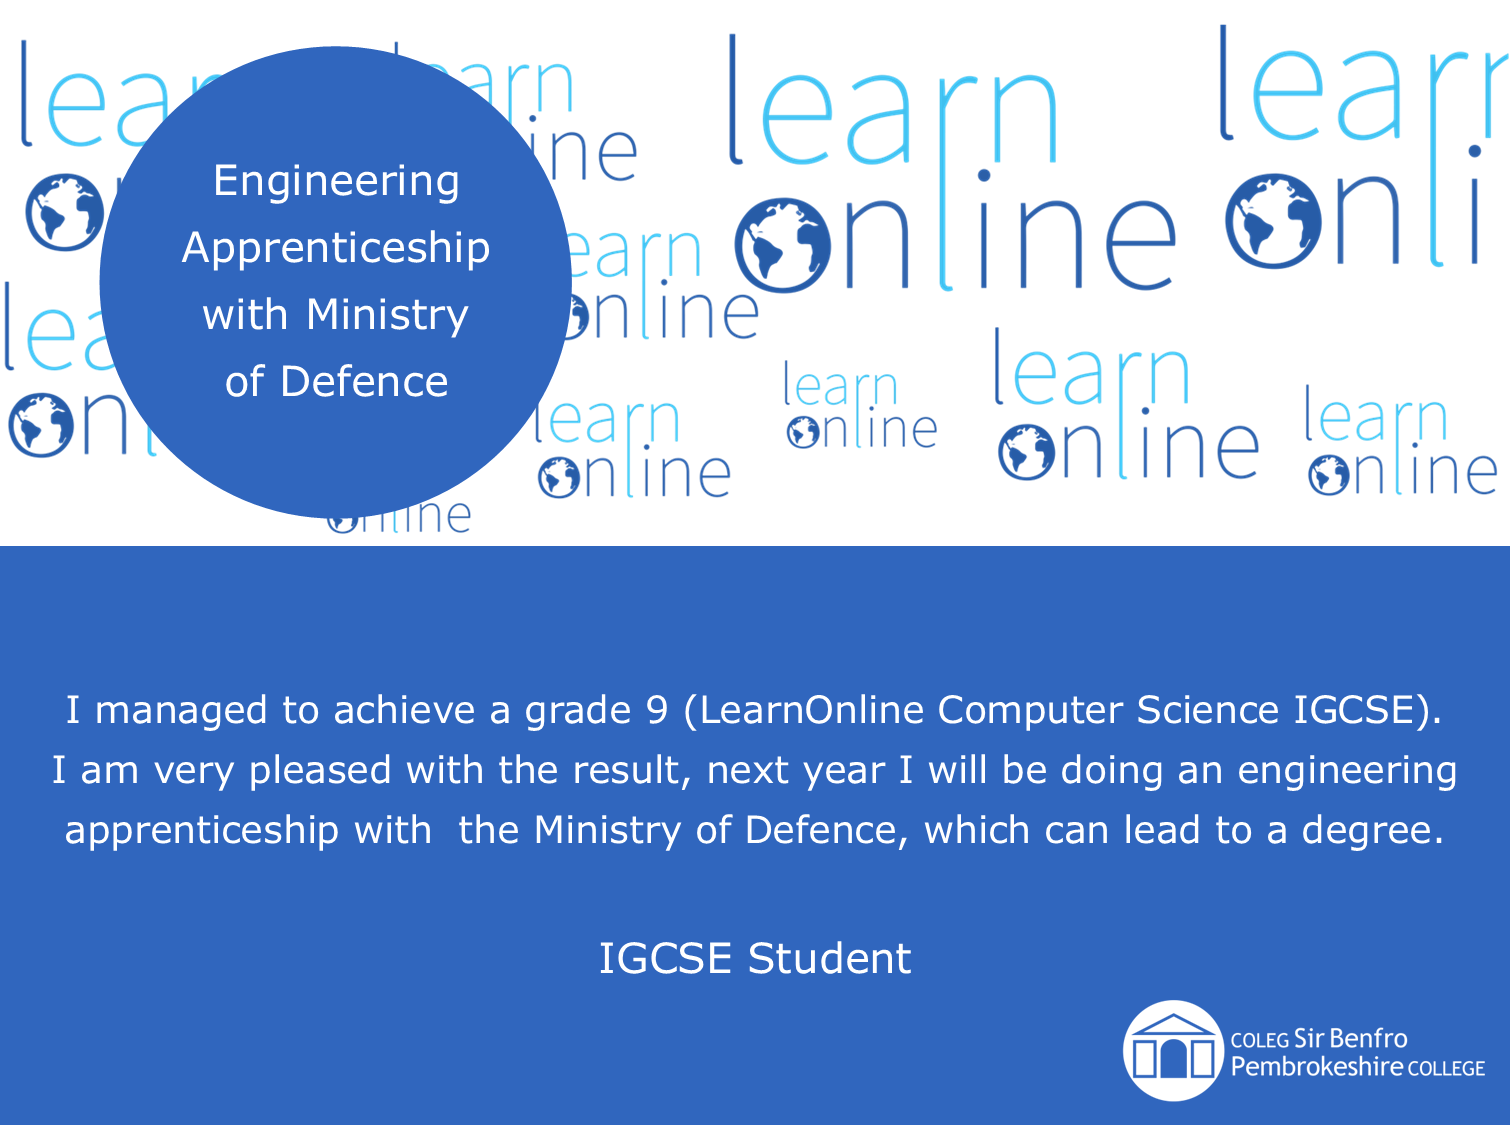 LearnOnline testimonial 'Engineering Apprenticeship with Ministry of Defence' I managed to achieve a grade 9 (LearnOnline Computer Science IGCSE). I am very pleased with the result, next year I will be doing an engineering apprenticeship with  the Ministry of Defence, which can lead to a degree. IGCSE Student